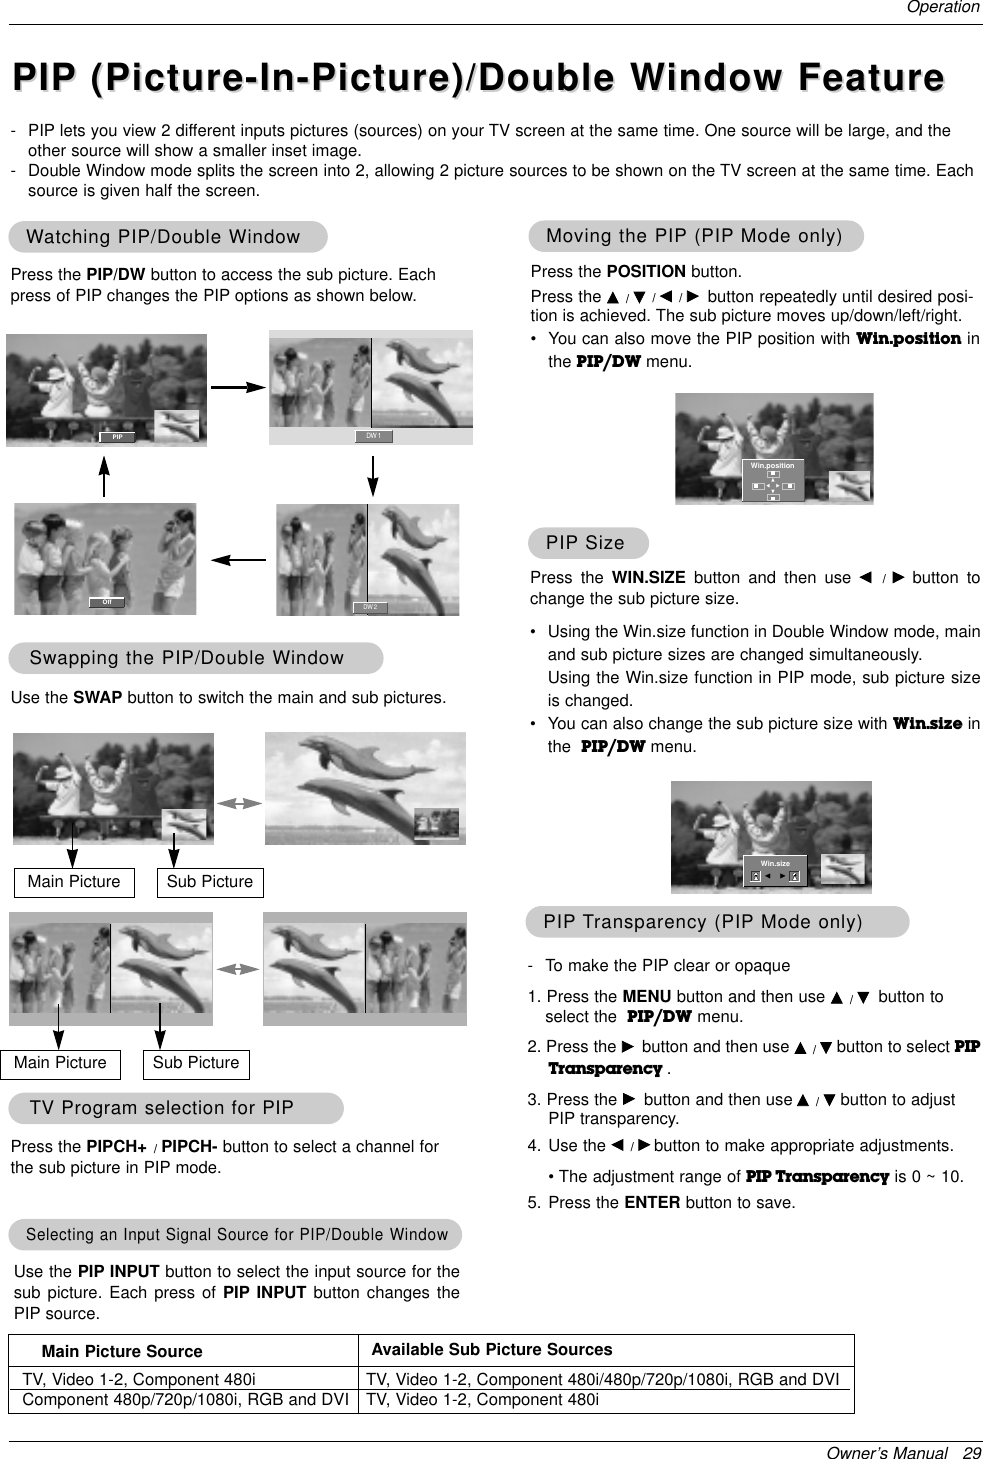 Owner’s Manual   29Operation- PIP lets you view 2 different inputs pictures (sources) on your TV screen at the same time. One source will be large, and theother source will show a smaller inset image.- Double Window mode splits the screen into 2, allowing 2 picture sources to be shown on the TV screen at the same time. Eachsource is given half the screen.PIPPIP (Picture-In-Picture)/Double W(Picture-In-Picture)/Double Window Featureindow FeatureWWatching PIP/Double Watching PIP/Double Windowindow Moving the PIPMoving the PIP (PIP(PIP Mode only)Mode only)Press the POSITION button. Press the D / E/ F / Gbutton repeatedly until desired posi-tion is achieved. The sub picture moves up/down/left/right.•You can also move the PIP position with Win.position inthe PIP/DW menu.◀▶▲▼Win.positionDW 1DW 2Press the PIP/DW button to access the sub picture. Eachpress of PIP changes the PIP options as shown below.PIPOffTV Program selection for PIPTV Program selection for PIPPress the PIPCH+ / PIPCH- button to select a channel forthe sub picture in PIP mode.Swapping the PIPSwapping the PIP//Double WDouble WindowindowUse the SWAP button to switch the main and sub pictures.Selecting an Input Signal Source for PIPSelecting an Input Signal Source for PIP/Double W/Double WindowindowUse the PIP INPUT button to select the input source for thesub picture. Each press of PIP INPUT button changes thePIP source.Main Picture Sub PictureMain Picture Sub PicturePIPPIP SizeSizePress the WIN.SIZE button and then use F  /  Gbutton tochange the sub picture size.•Using the Win.size function in Double Window mode, mainand sub picture sizes are changed simultaneously.Using the Win.size function in PIP mode, sub picture sizeis changed.•You can also change the sub picture size with Win.size inthe  PIP/DW menu.Win.sizeF GPIPPIP TTransparency (PIPransparency (PIP Mode only)Mode only)- To make the PIP clear or opaque1. Press the MENU button and then use D / Ebutton toselect the  PIP/DW menu.2. Press the Gbutton and then use D / Ebutton to select PIPTransparency . 3. Press the Gbutton and then use D / Ebutton to adjustPIP transparency.4. Use the F / Gbutton to make appropriate adjustments.• The adjustment range of PIP Transparency is 0 ~ 10.5. Press the ENTER button to save.Main Picture Source Available Sub Picture SourcesTV, Video 1-2, Component 480iComponent 480p/720p/1080i, RGB and DVI TV, Video 1-2, Component 480i/480p/720p/1080i, RGB and DVITV, Video 1-2, Component 480i